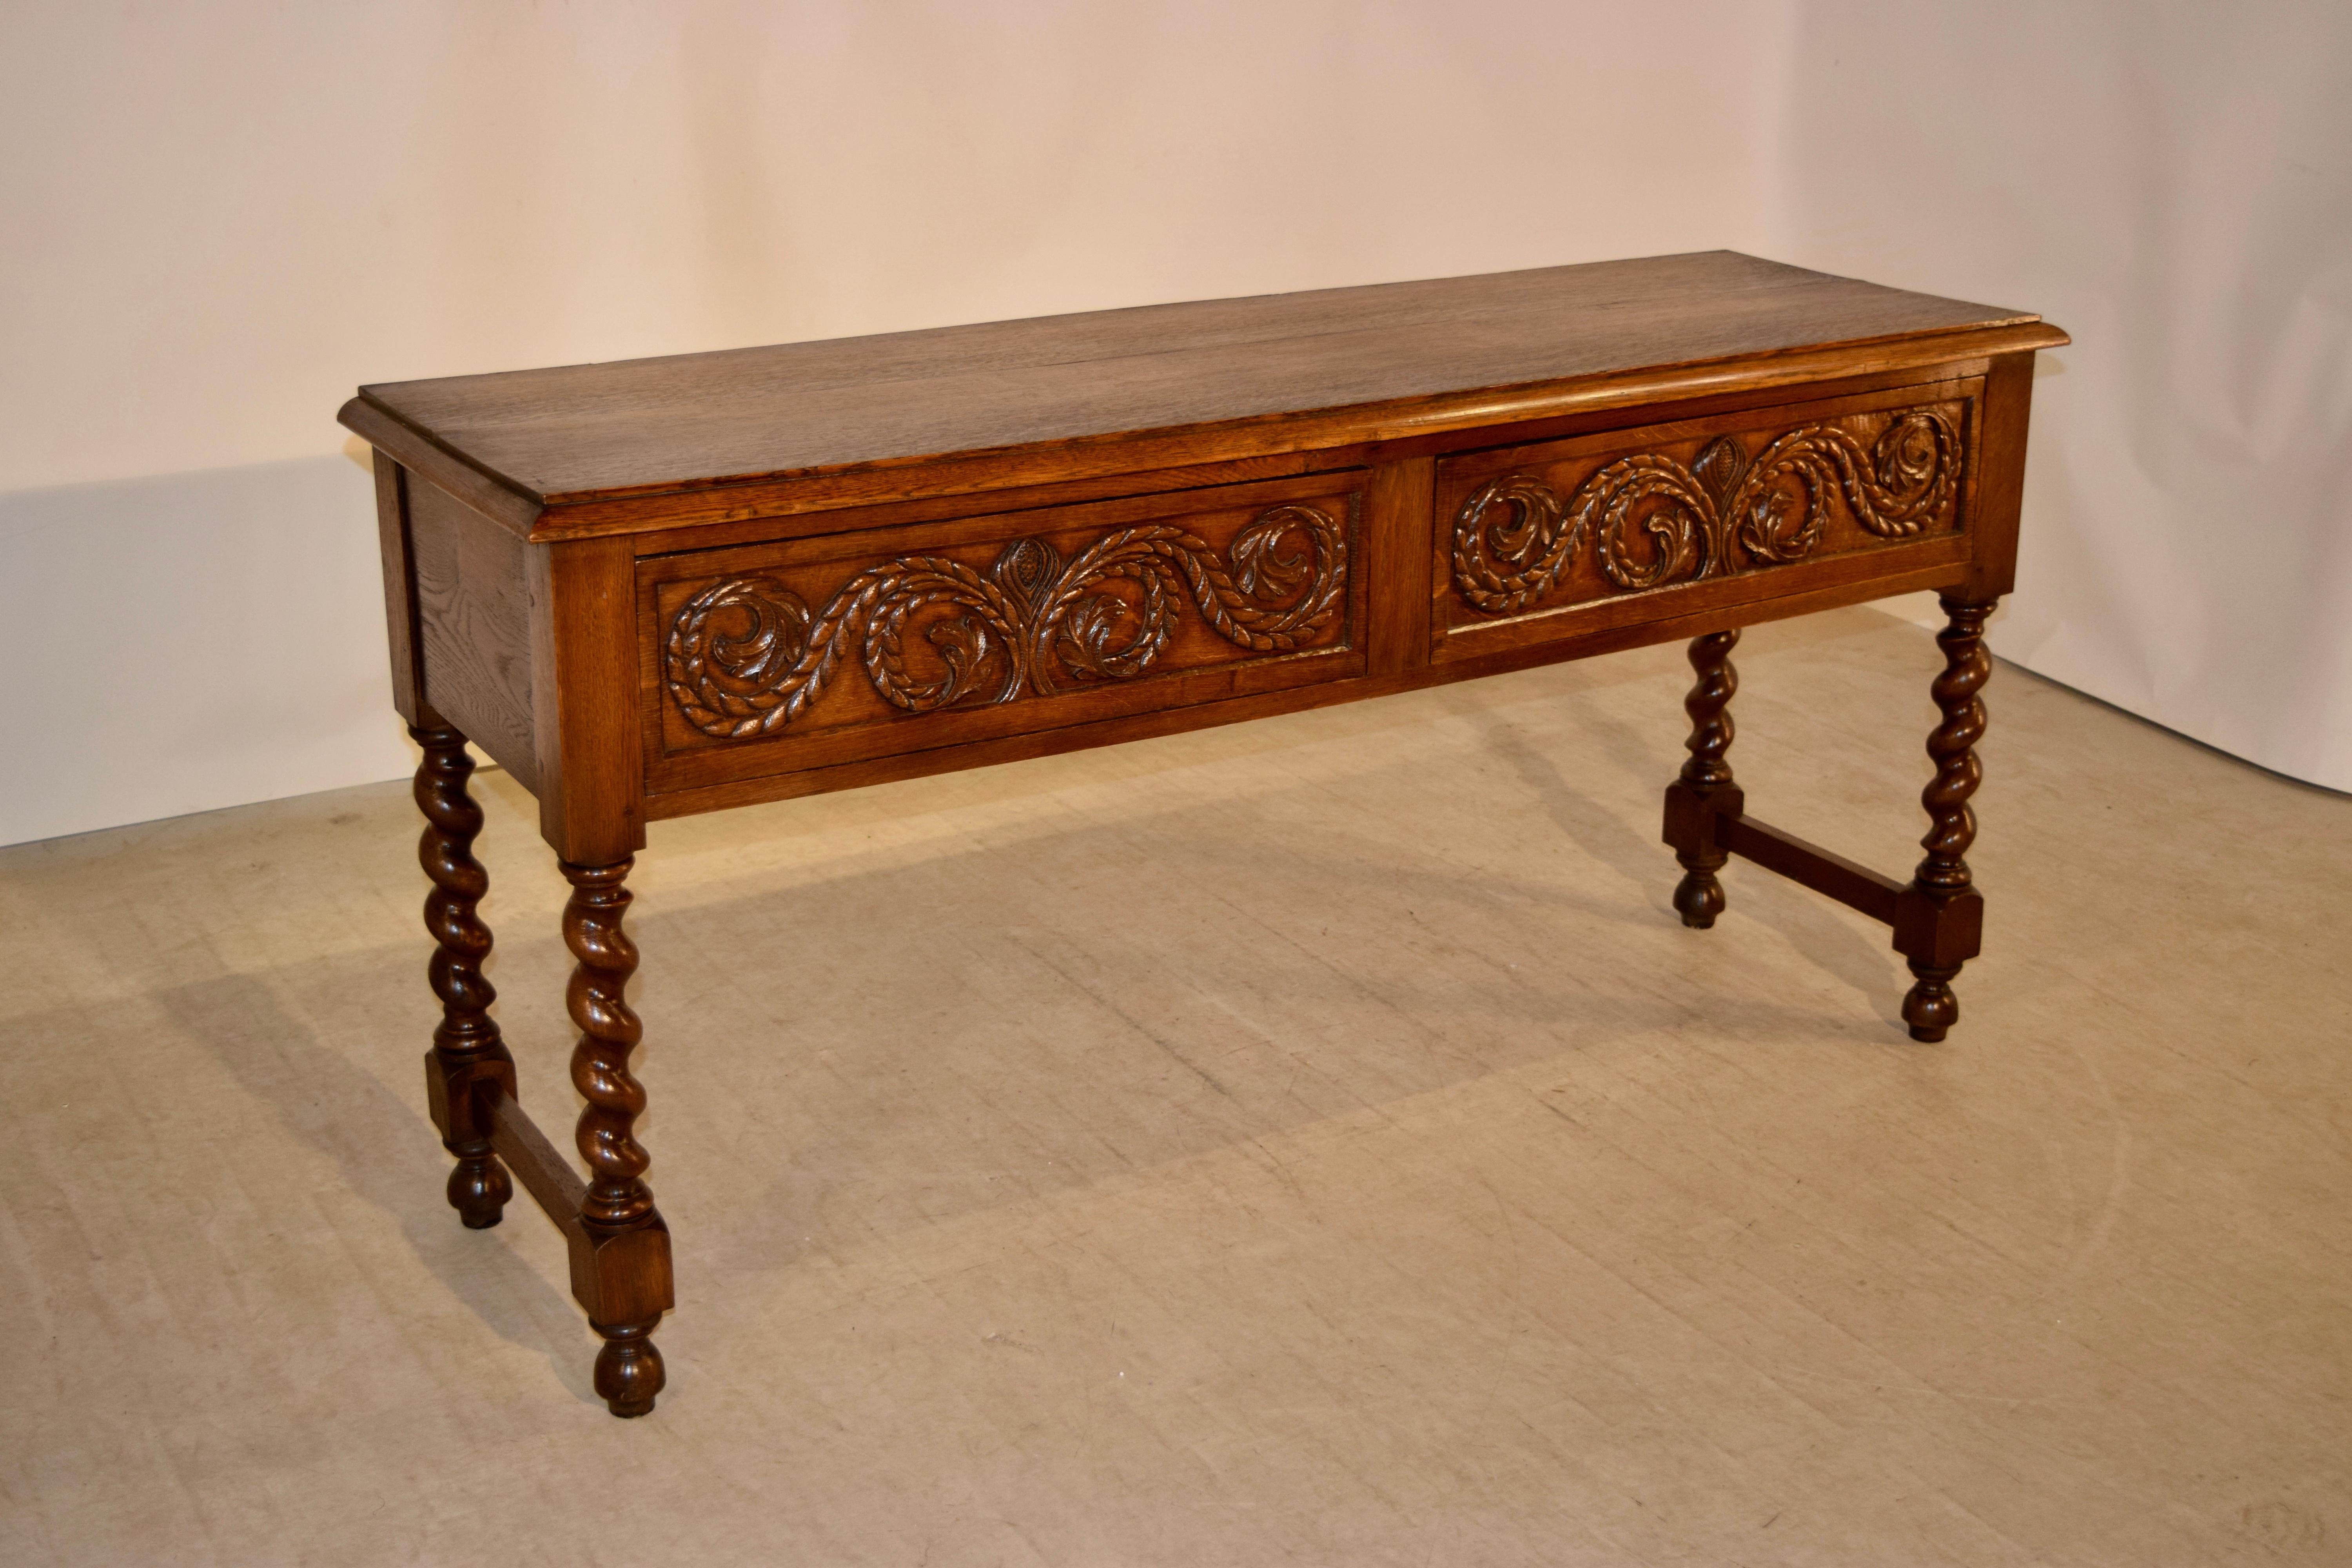 Late 19th Century sideboard from France made from oak. The top has a beveled edge following down to tow drawers, which are expertly hand-carved and are opened by releasing hidden latches underneath the drawers. The legs are hand-turned barley twist